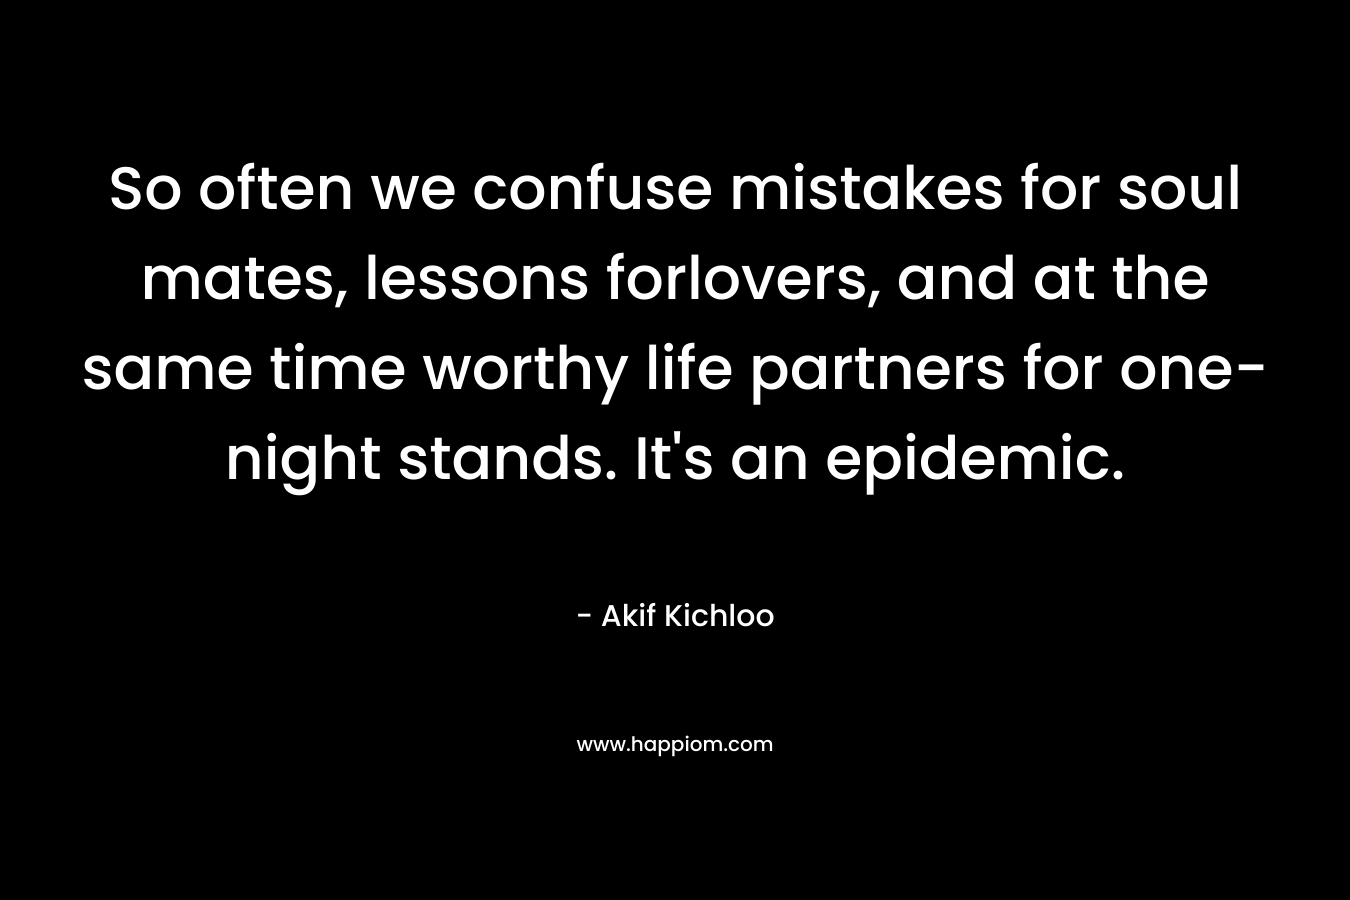 So often we confuse mistakes for soul mates, lessons forlovers, and at the same time worthy life partners for one-night stands. It’s an epidemic. – Akif Kichloo